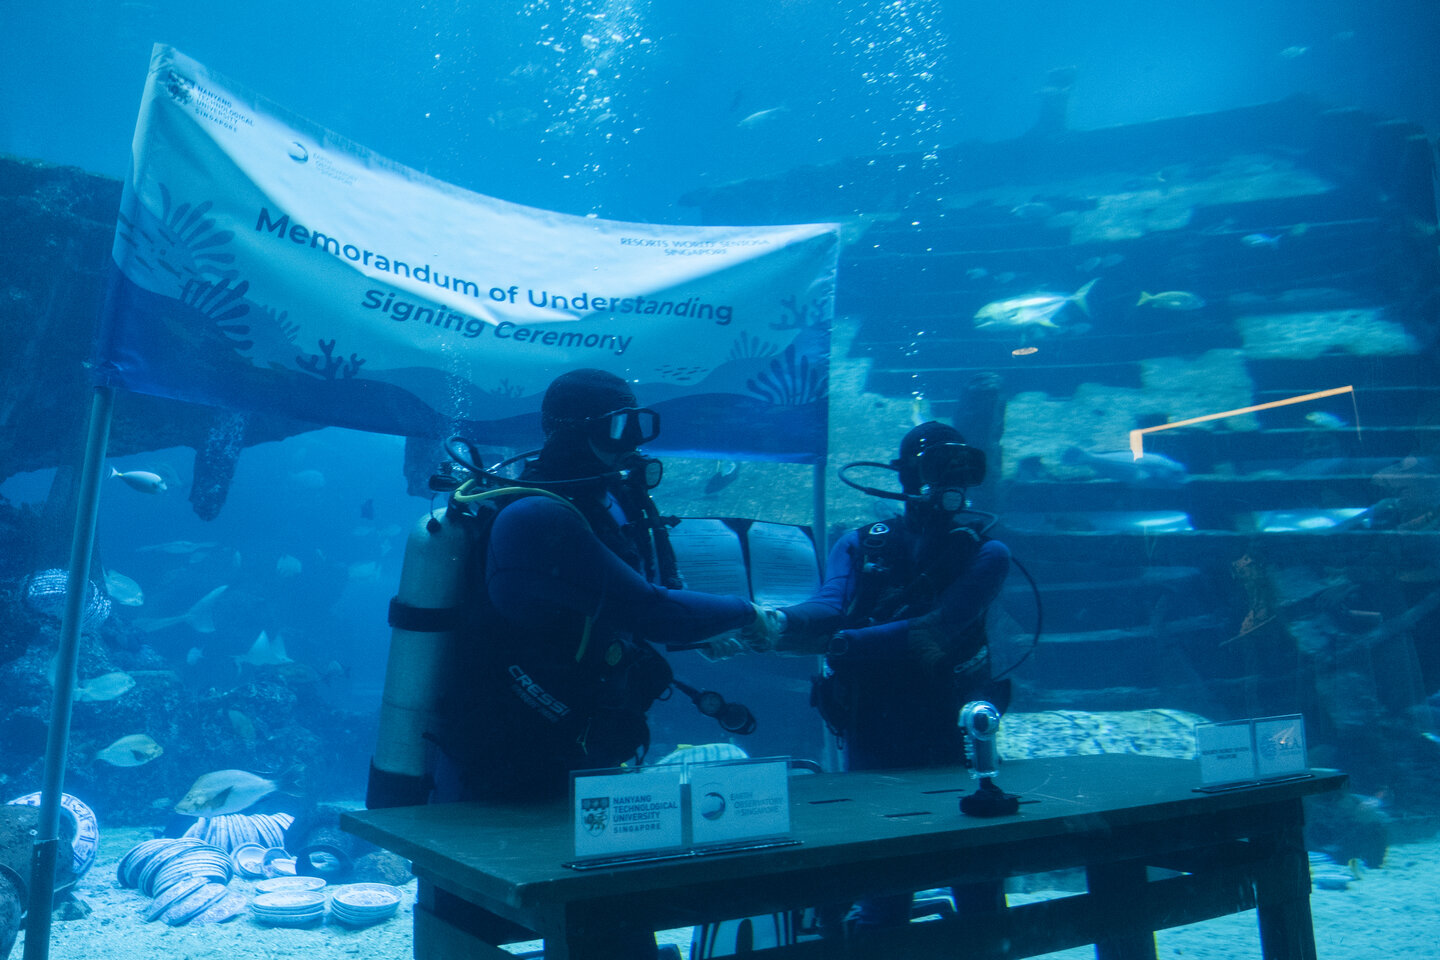 Assistant Professor Kyle Morgan from NTU’s Asian School of the Environment and Abel Yeo from S.E.A. Aquarium’s Education, Research and Conservation team signing the joint MOU underwater.